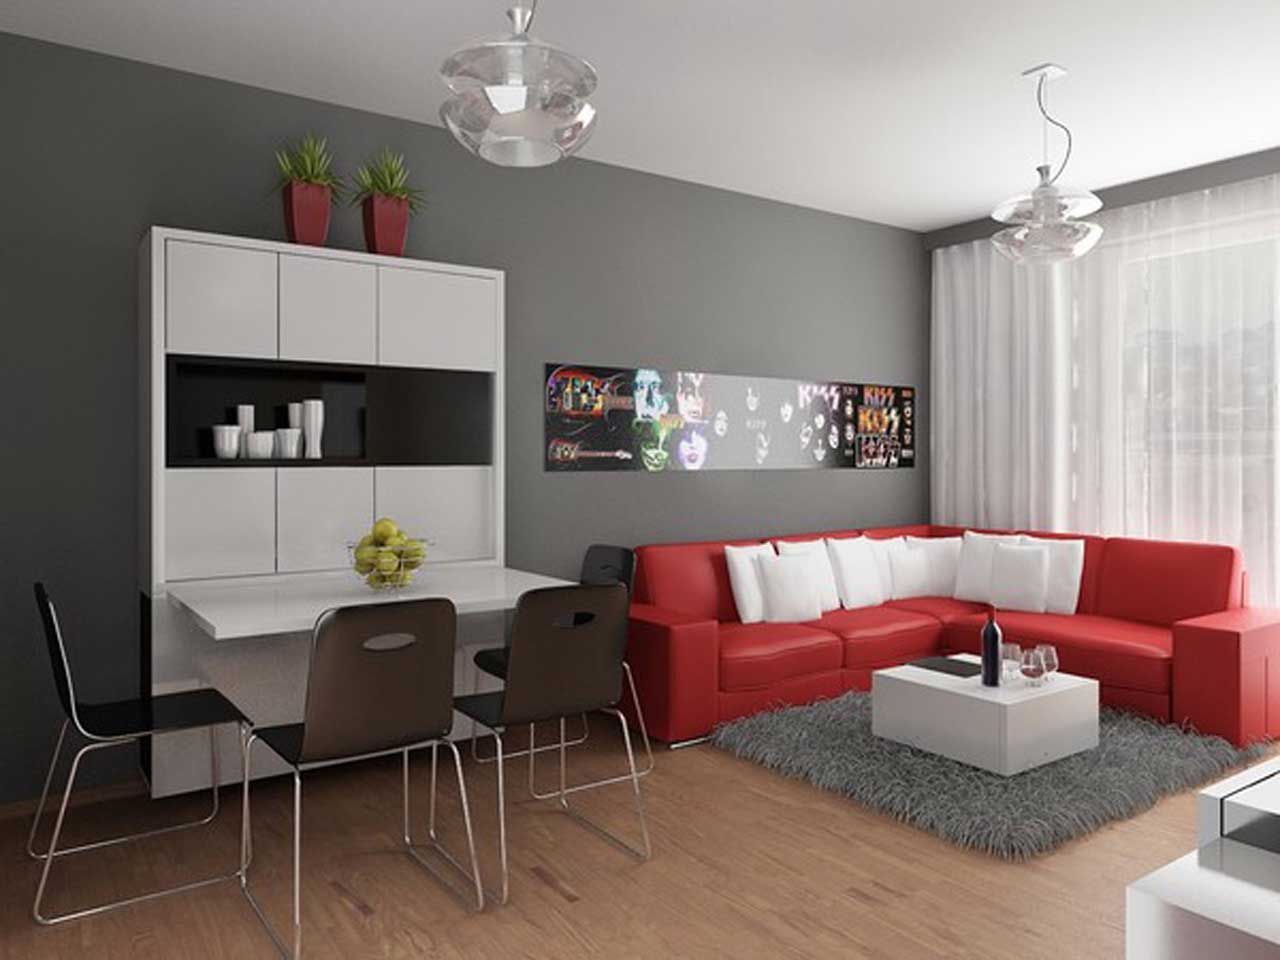 Living Room Chrome Gray Living Room Design With Chrome Ceiling Light Over White Study Desk And Corner Leather Red Sofa Modern Design In Grey Living Room Decor Views Dashing Red Sofa Design In Living Room Living Room Gray Living Room For Minimalist Concept